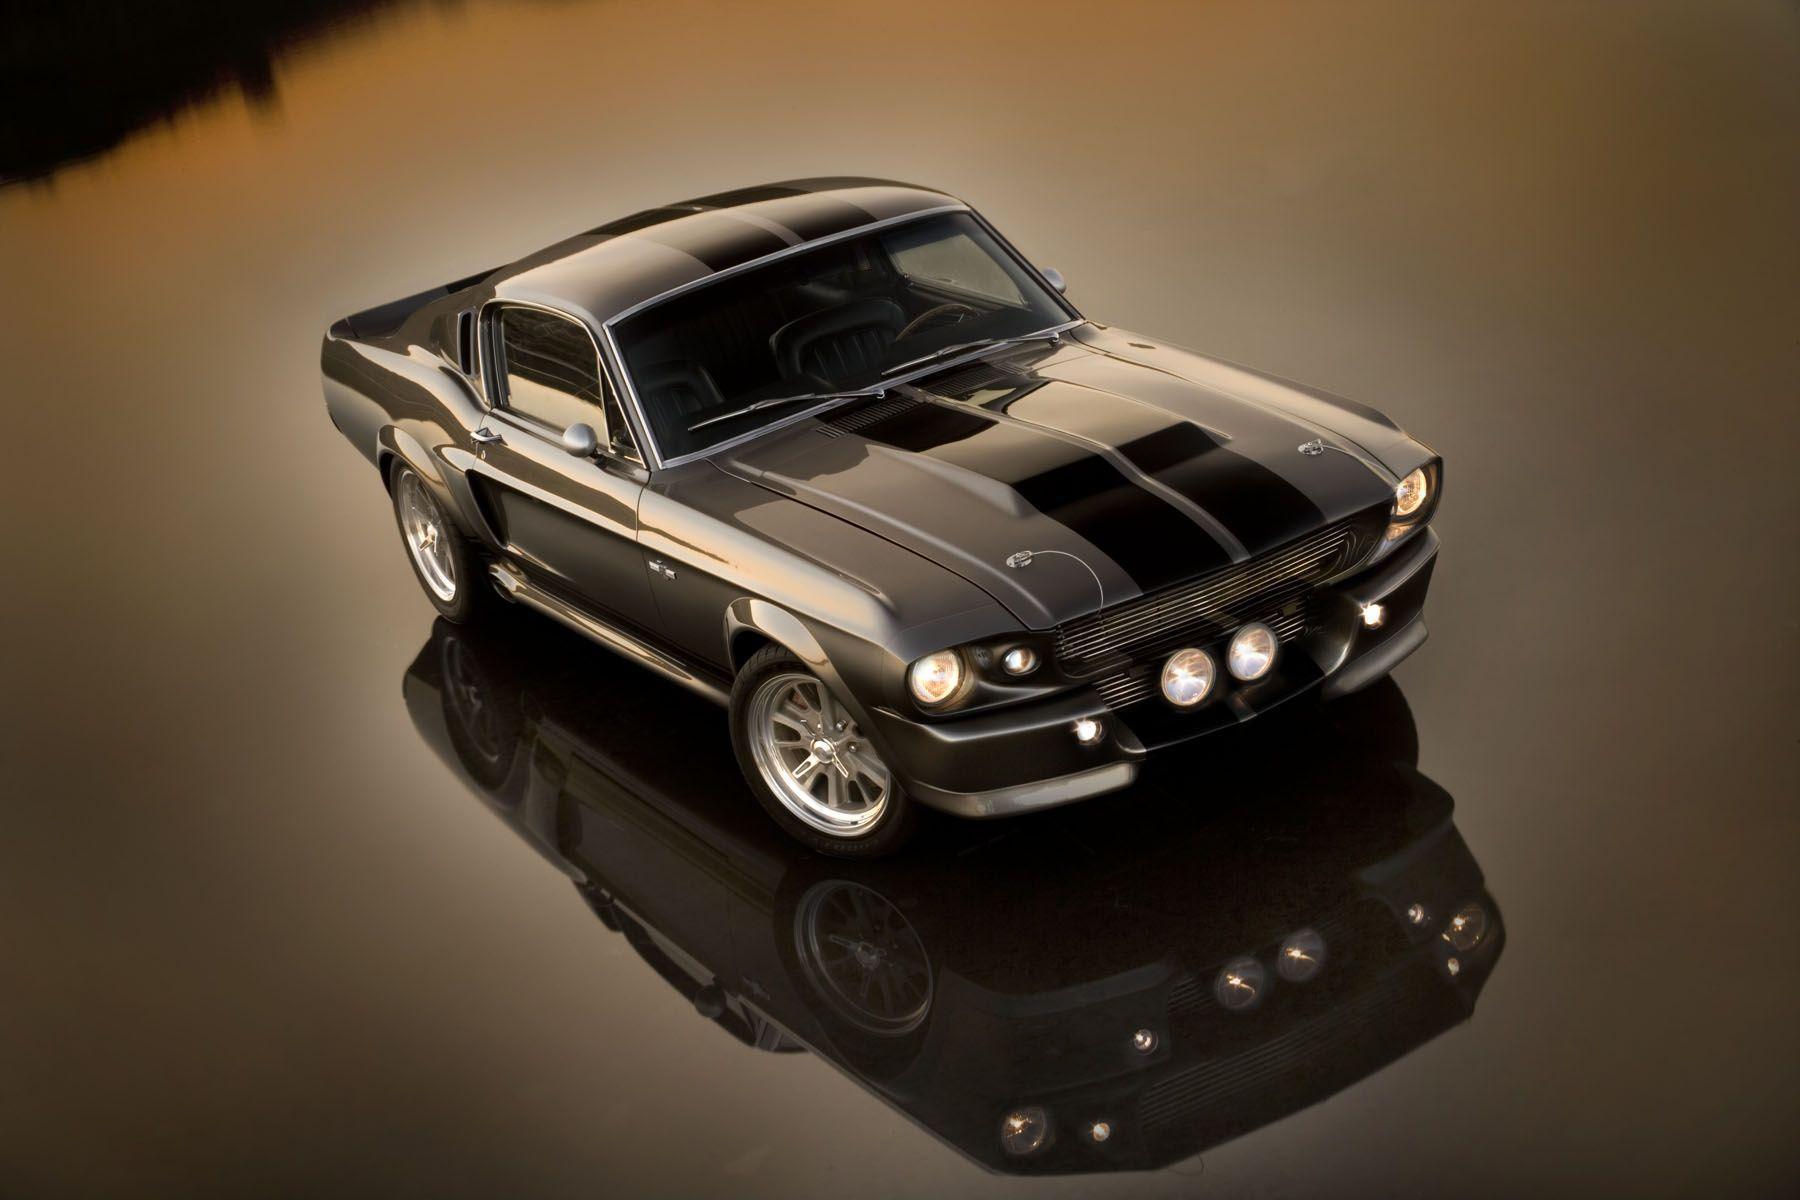 Ford Mustang 1967 Eleanor Wallpaper 1967 Shelby Mustang Gt500